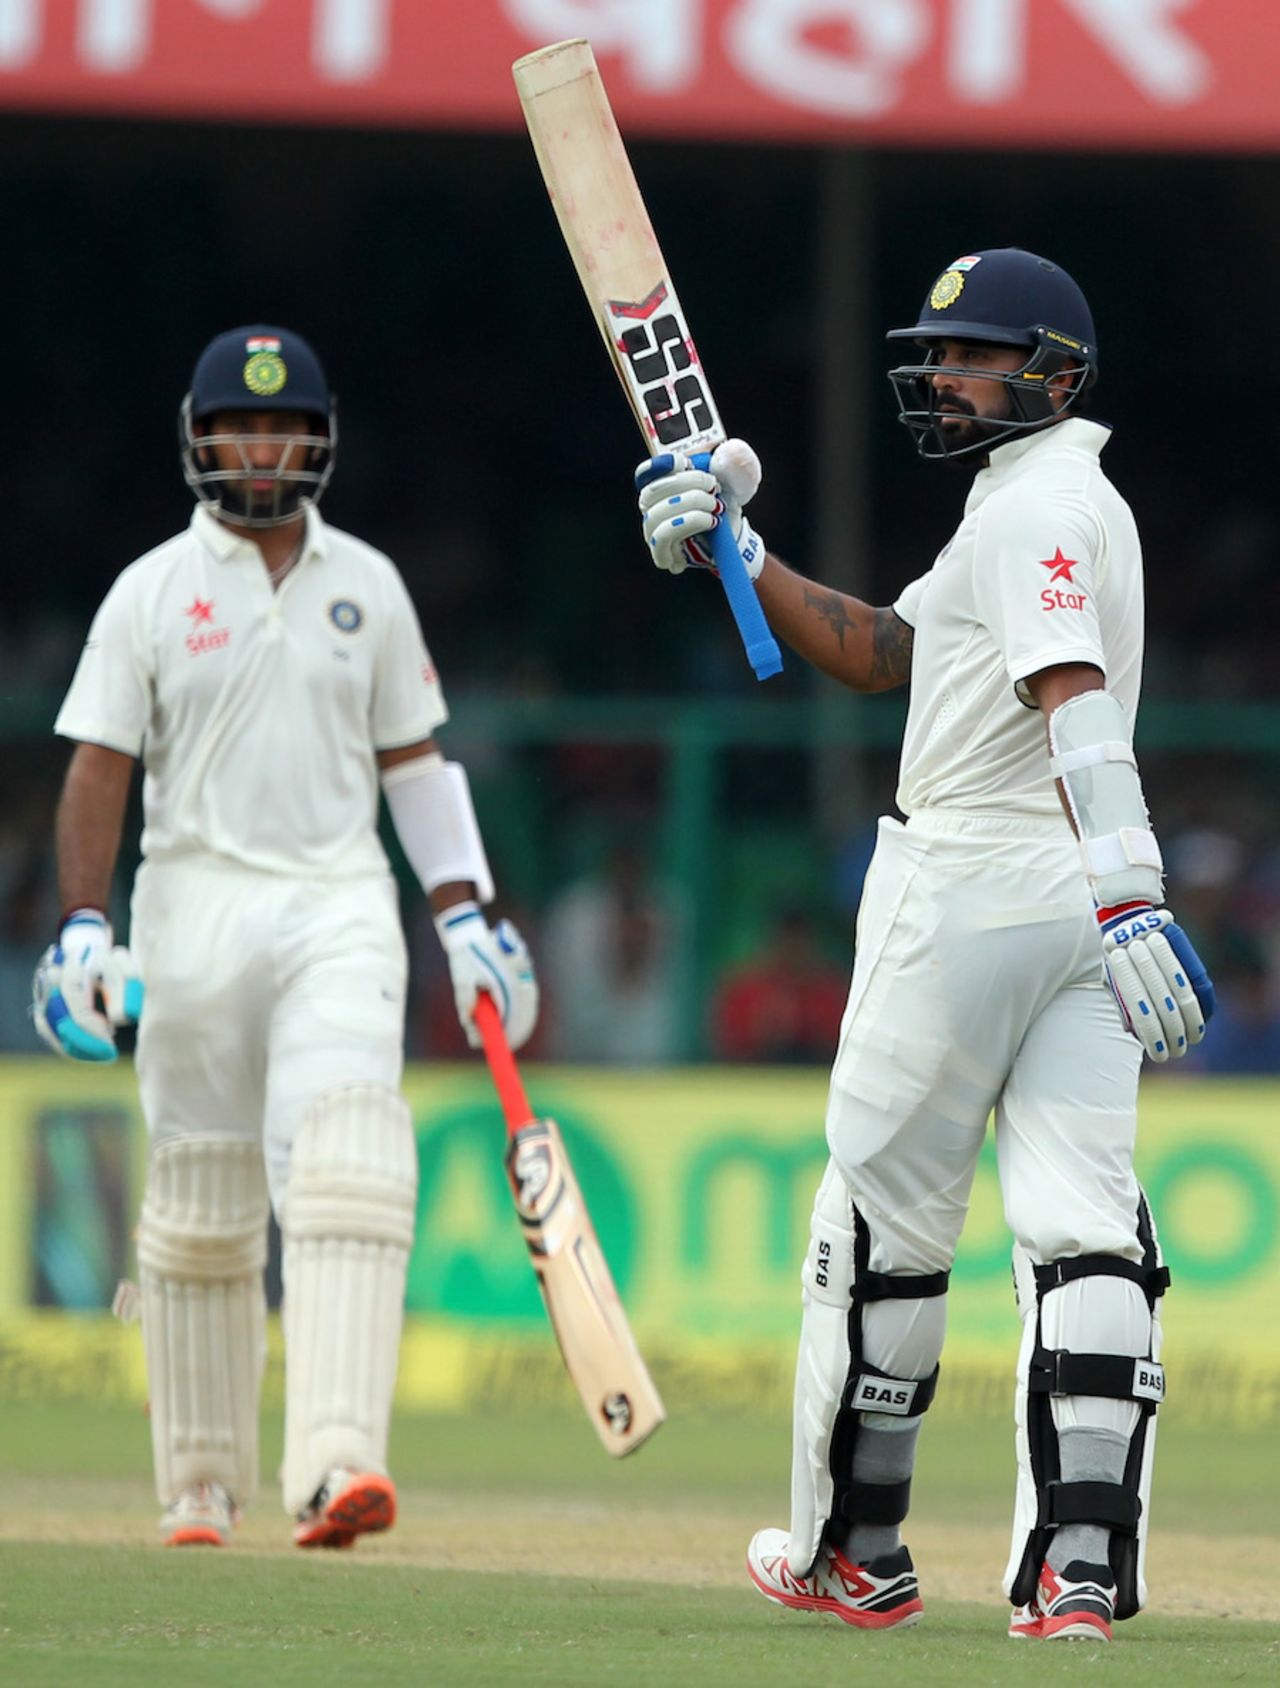 M Vijay brought up his fifty after lunch, India v New Zealand, 1st Test, Kanpur, 1st day, September 22, 2016